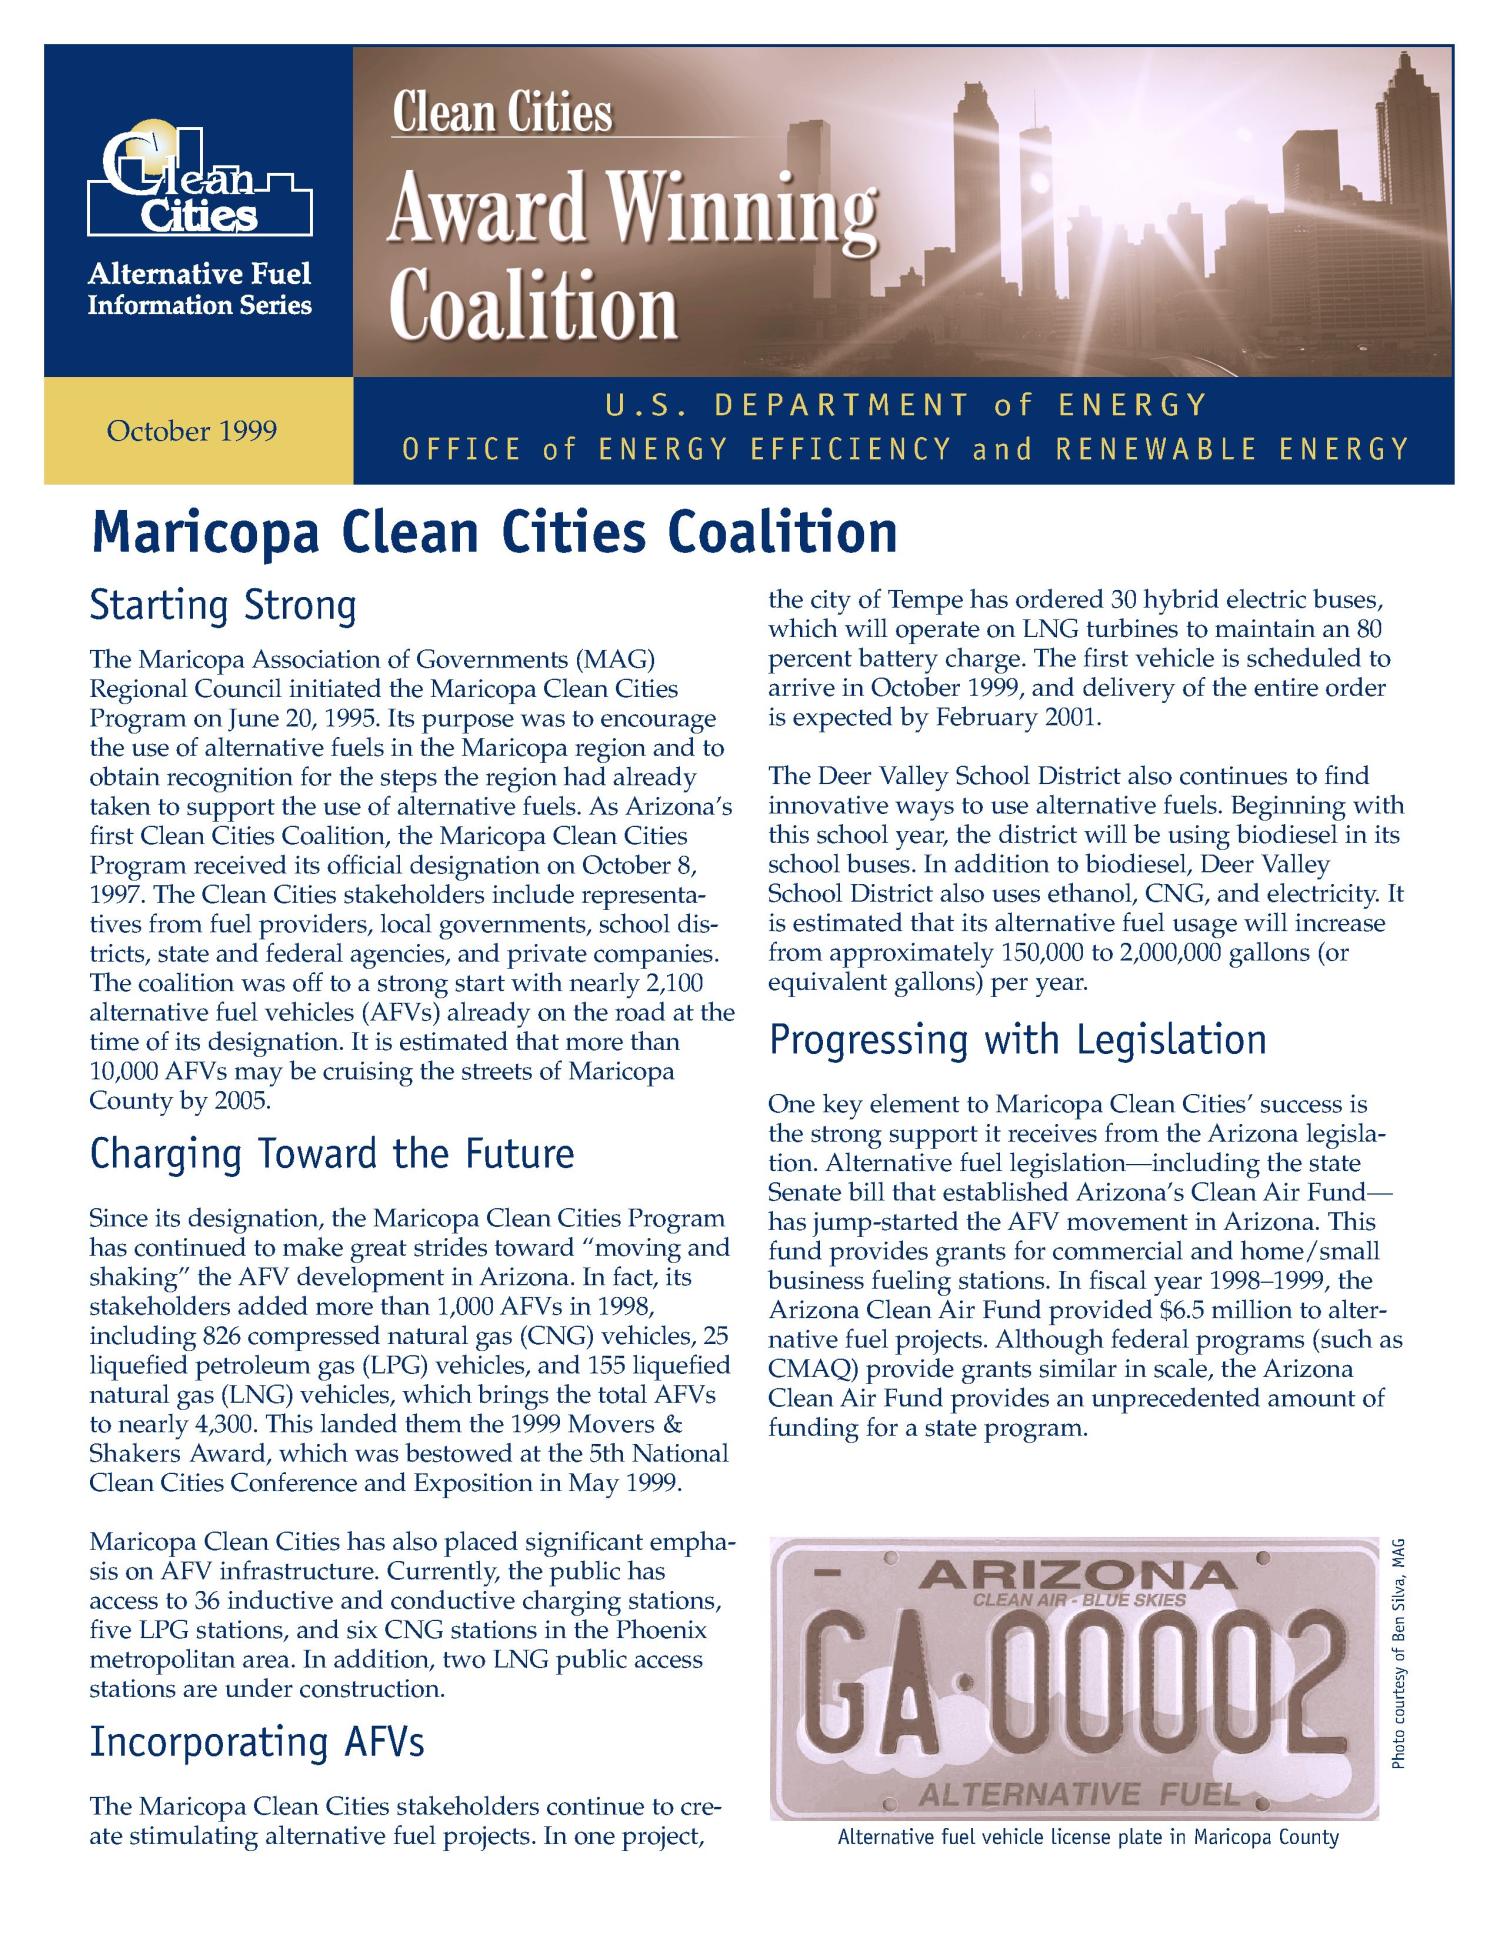 Clean cities: Award winning coalition -- Maricopa
                                                
                                                    [Sequence #]: 1 of 2
                                                